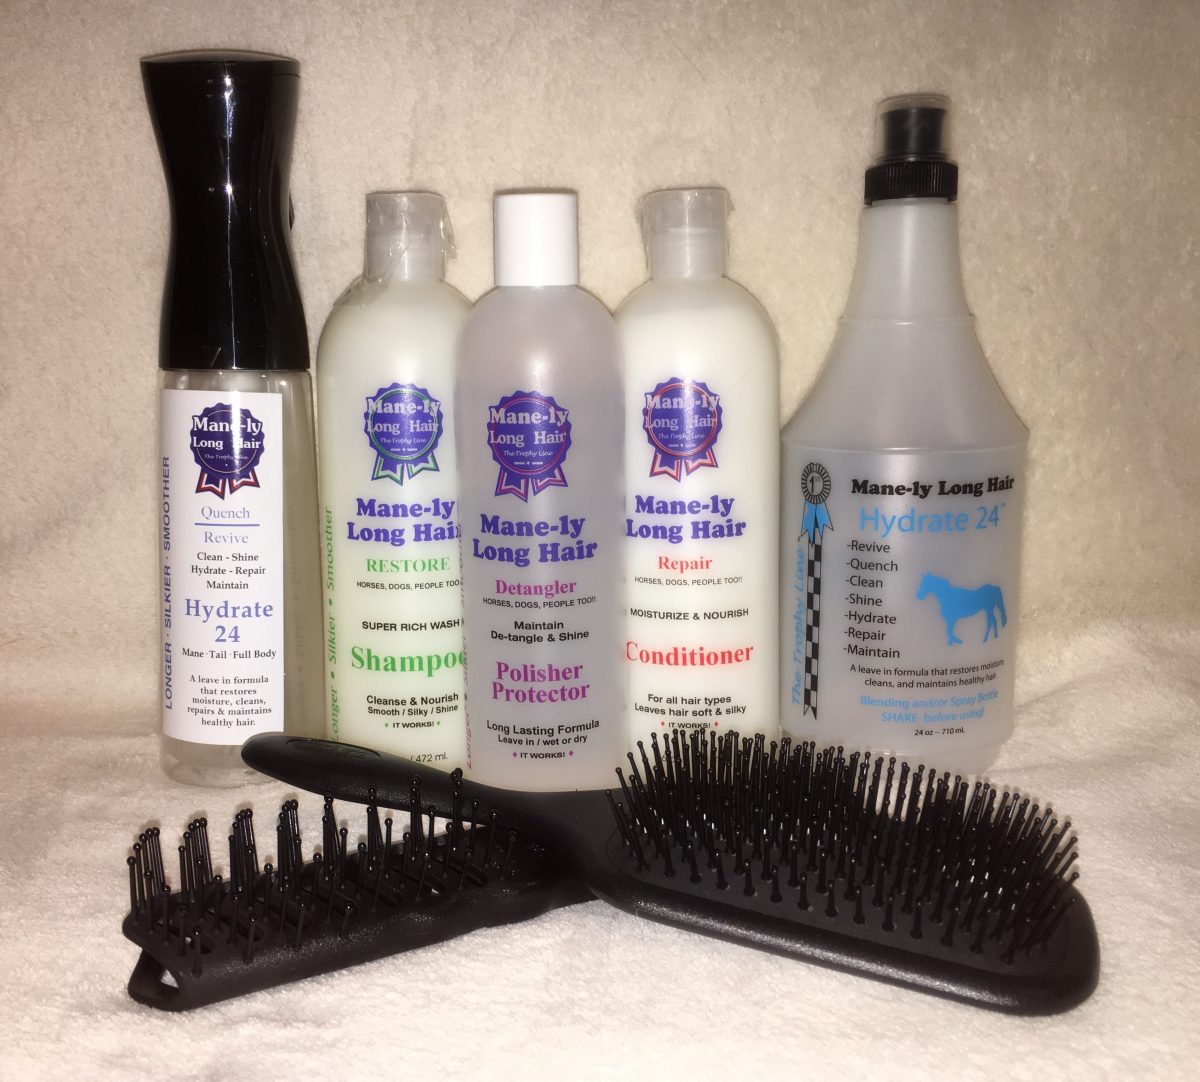 Mane-ly Long Hair small grooming kit (without body brushes) - Herbies Yard  Supplies